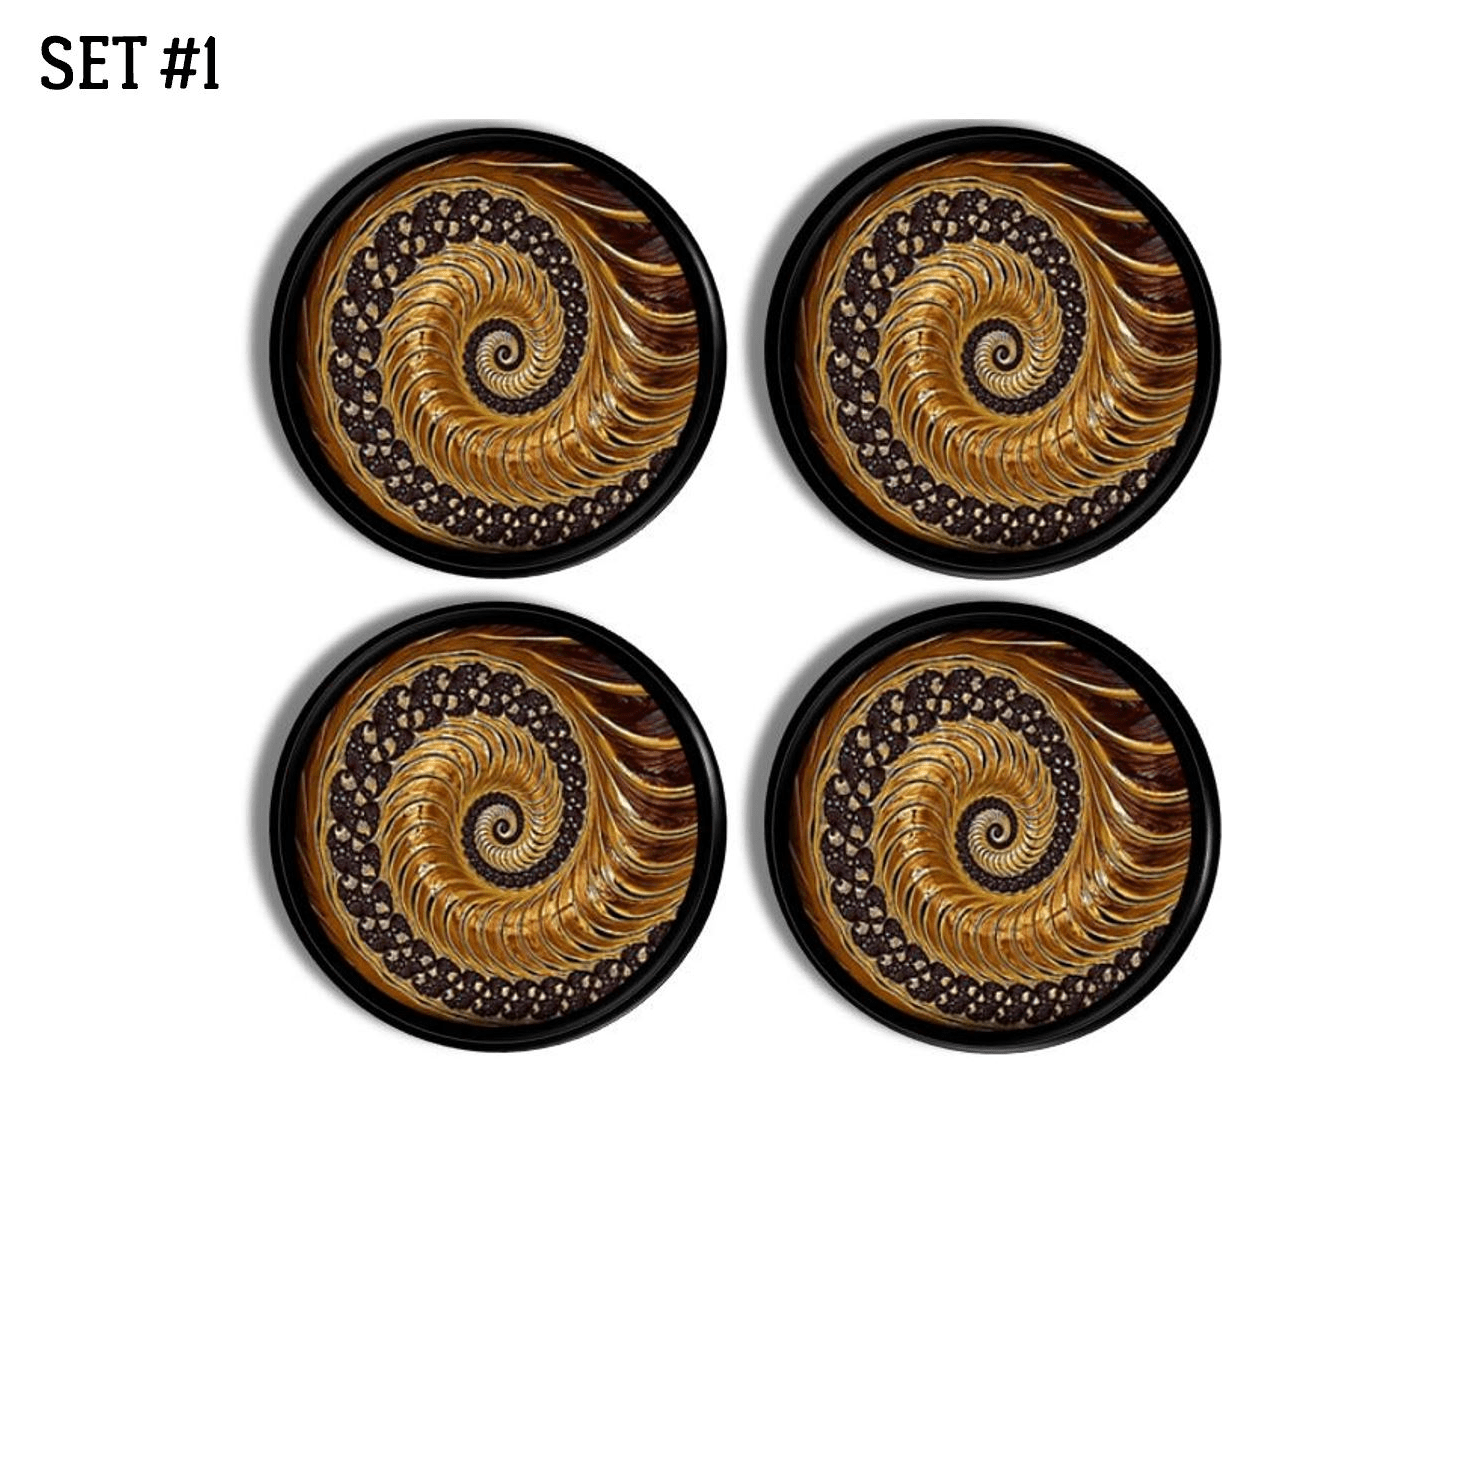 4 decorative furniture door handles. Handmade in a rich brown and gold earth tone optical illusion spiral swirl design. Made on a black drawer pull knob.